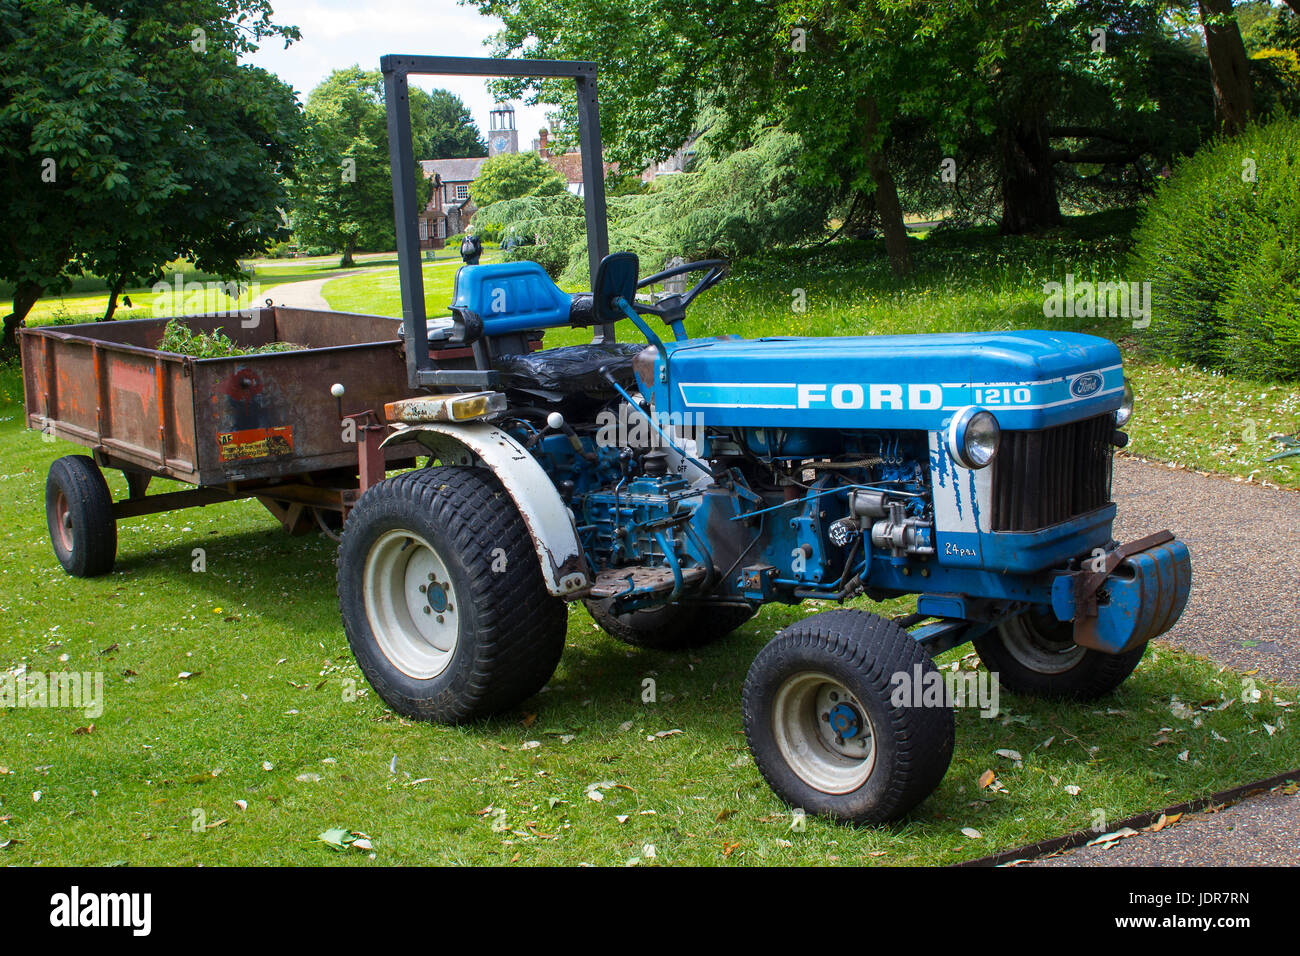 An old but well maintained Ford tractor and box trailer in use daily in the West Dean Estate gardens in West Sussex, England Stock Photo